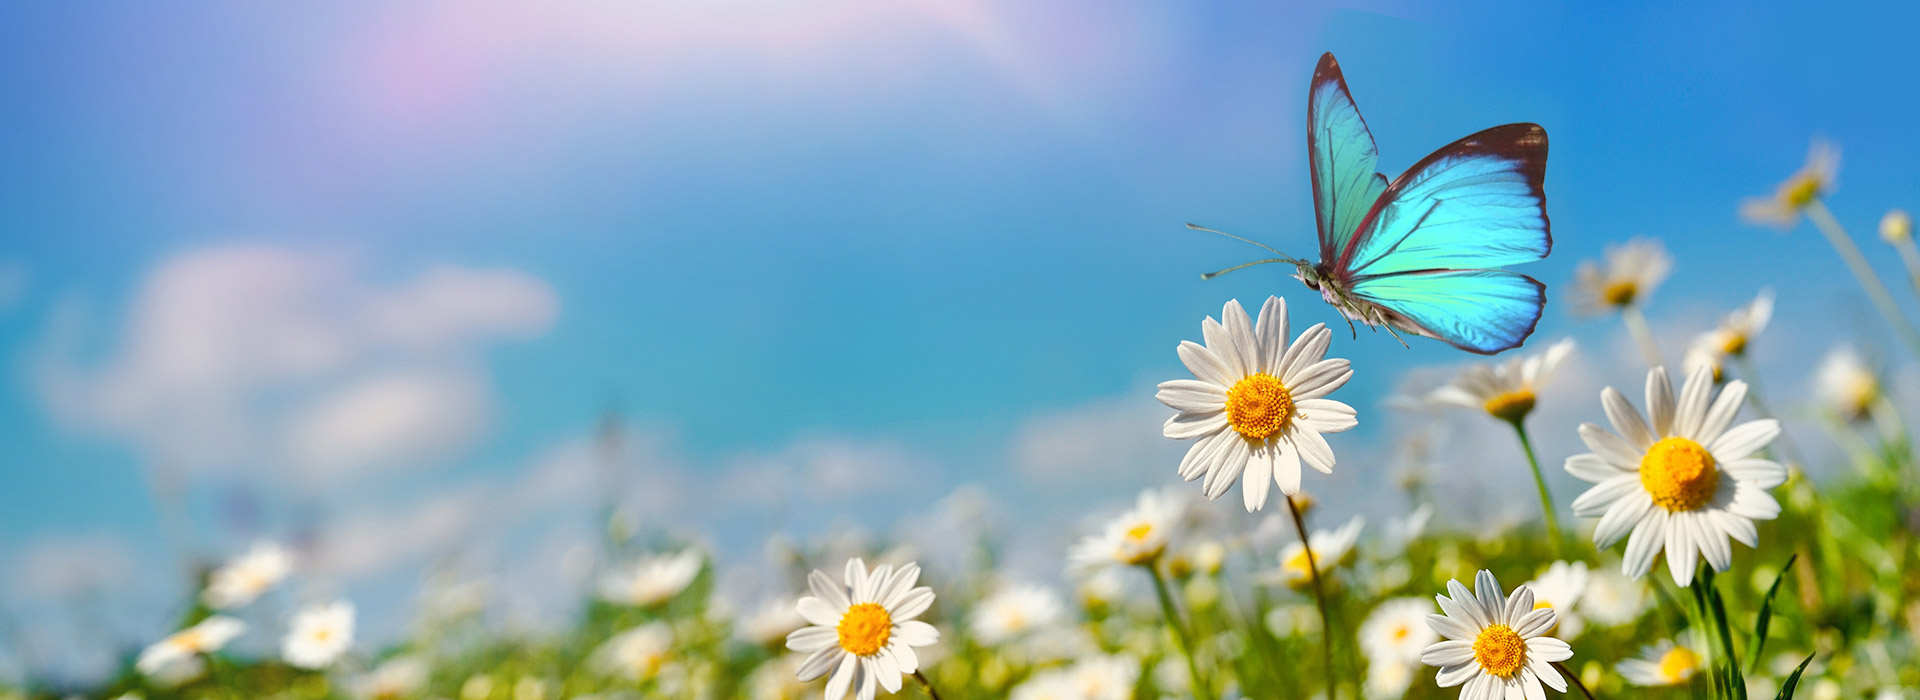 turquoise butterfly on daisies